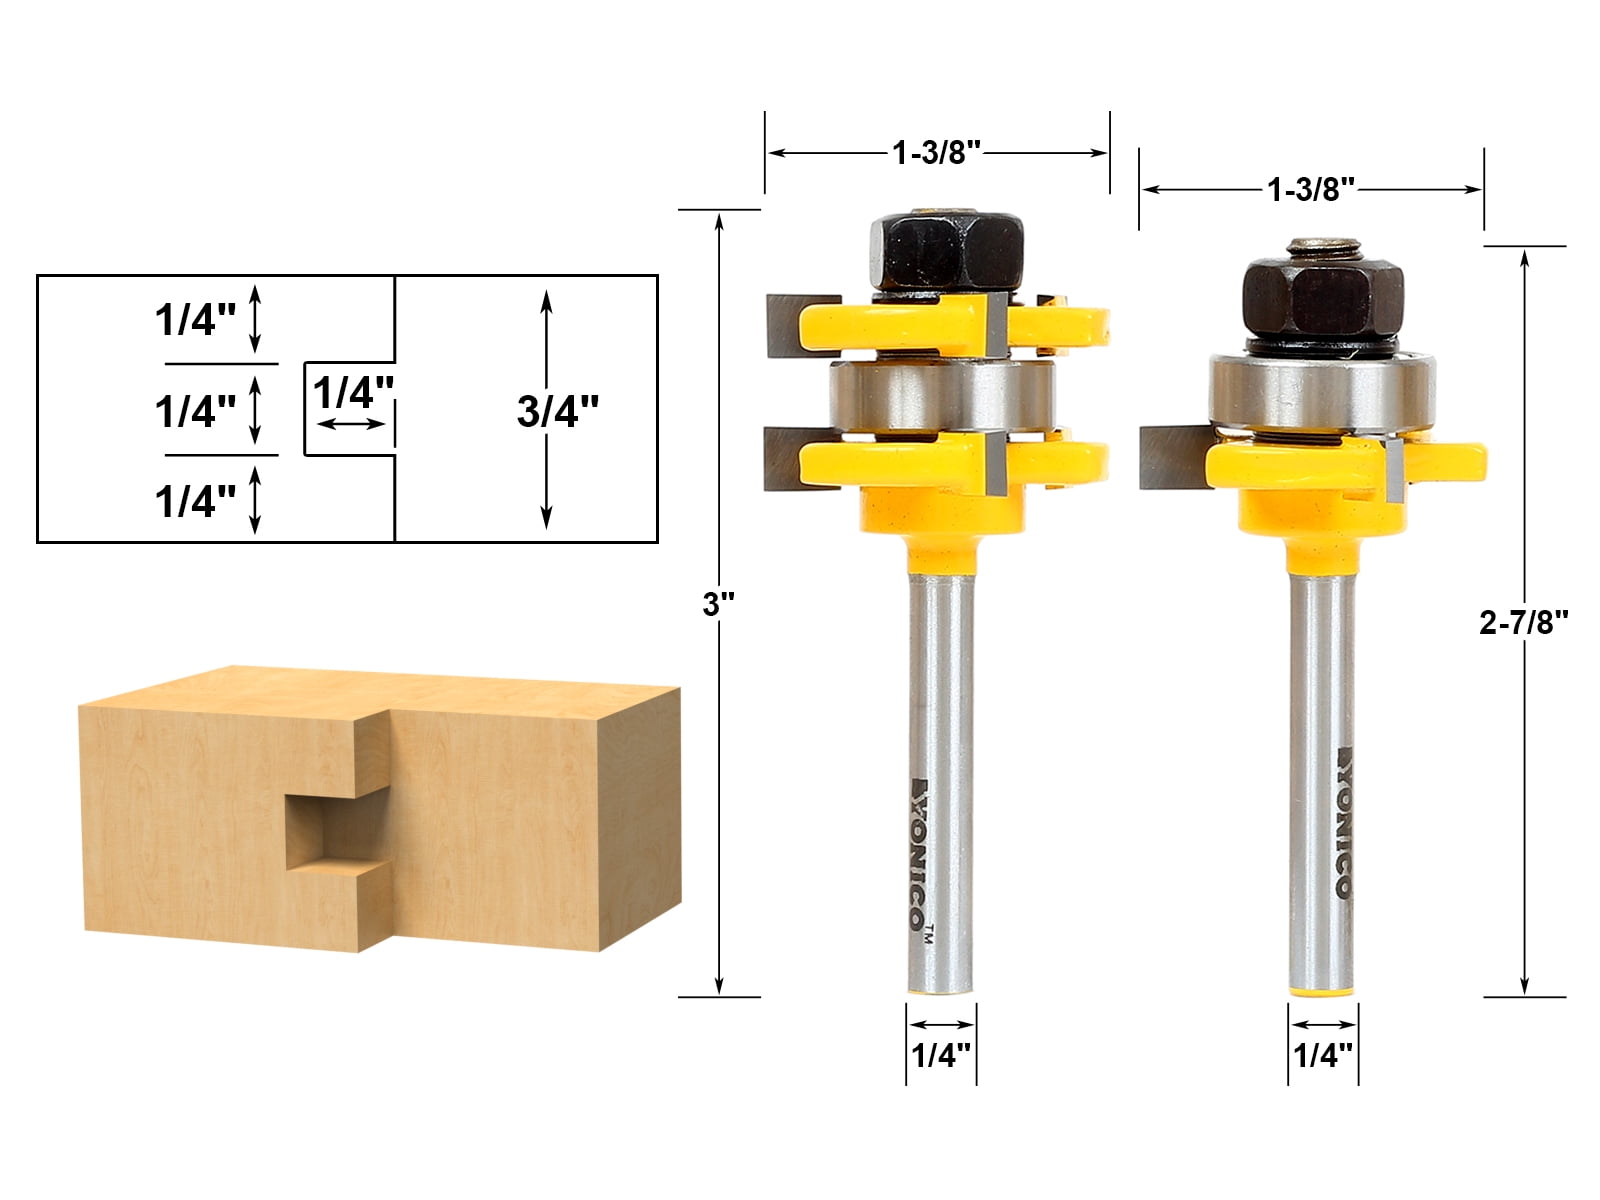 Yonico 15423 Flooring 4 Bit Tongue and Groove Router Bit Set 1/2-Inch Shank 